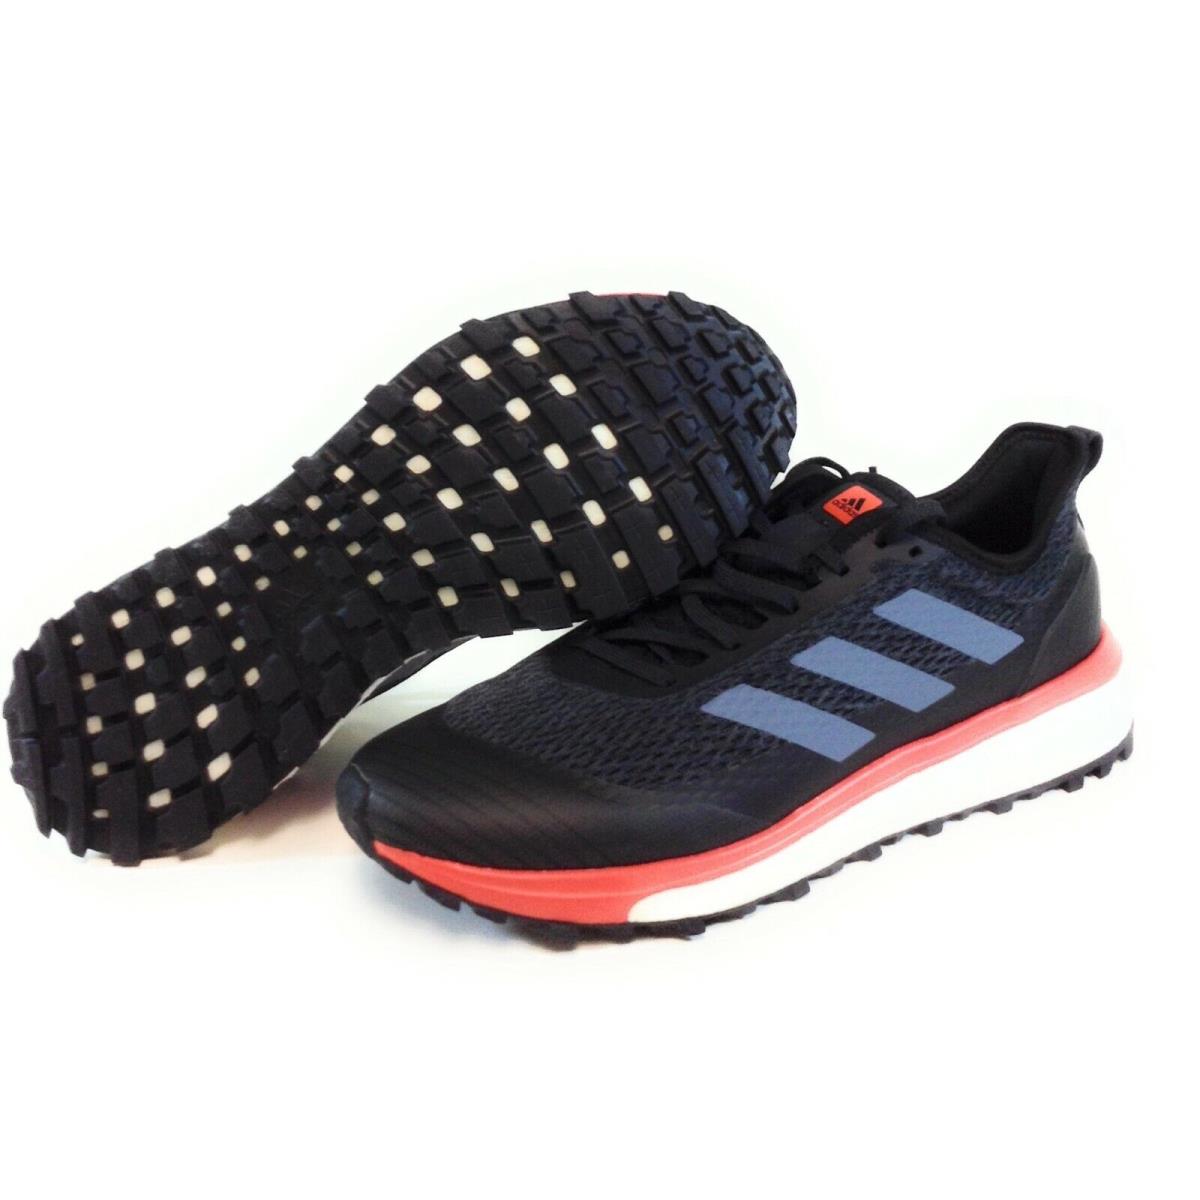 Womens Adidas Response Trail CP8690 Black Red White Boost Sneakers Shoes - Black